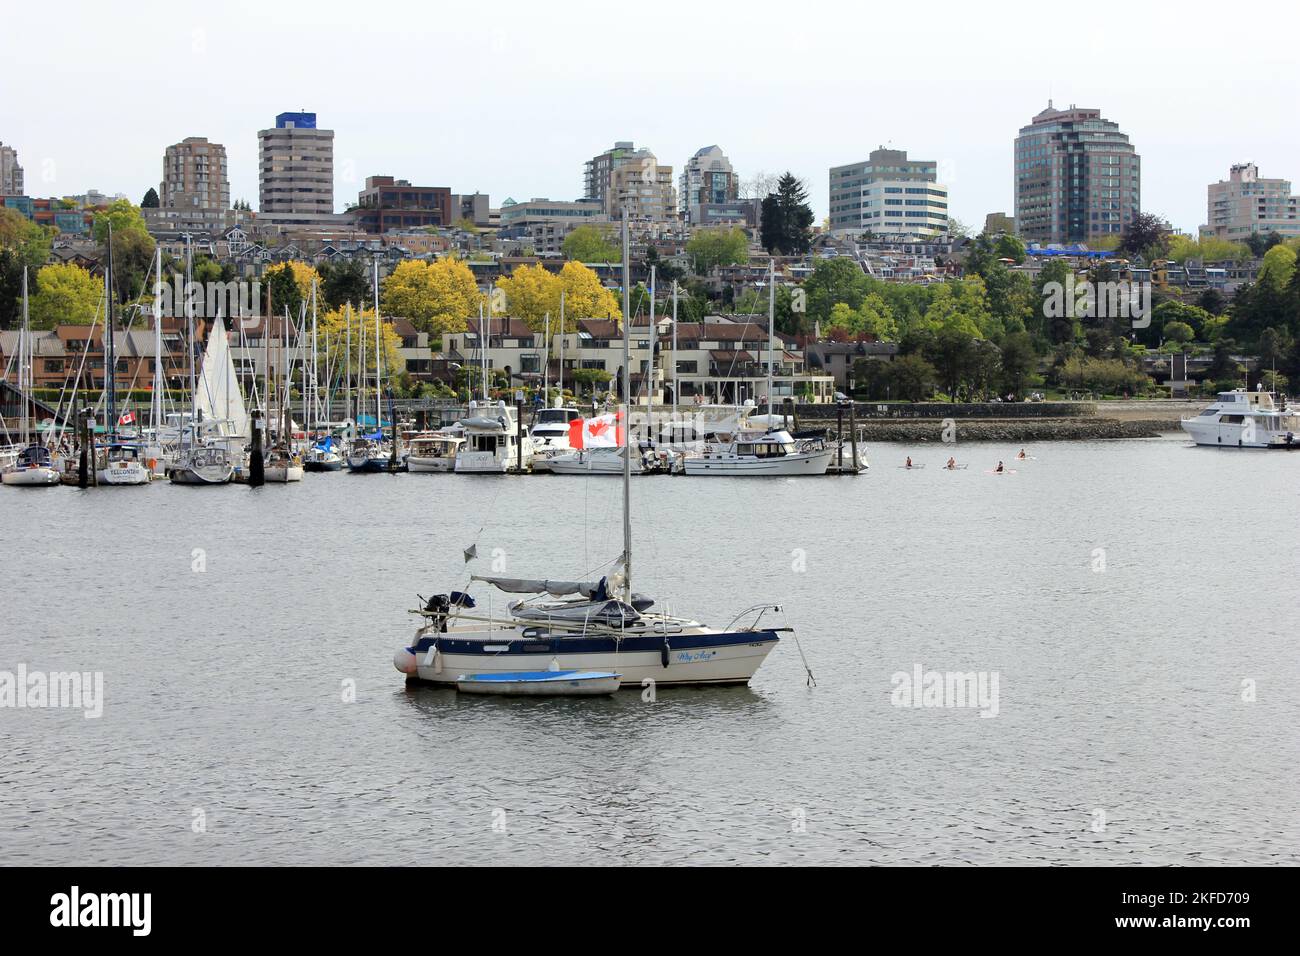 A beautiful shot of a sailing boat with a Canadian flag in False Creek lake in Vancouver, Canada Stock Photo